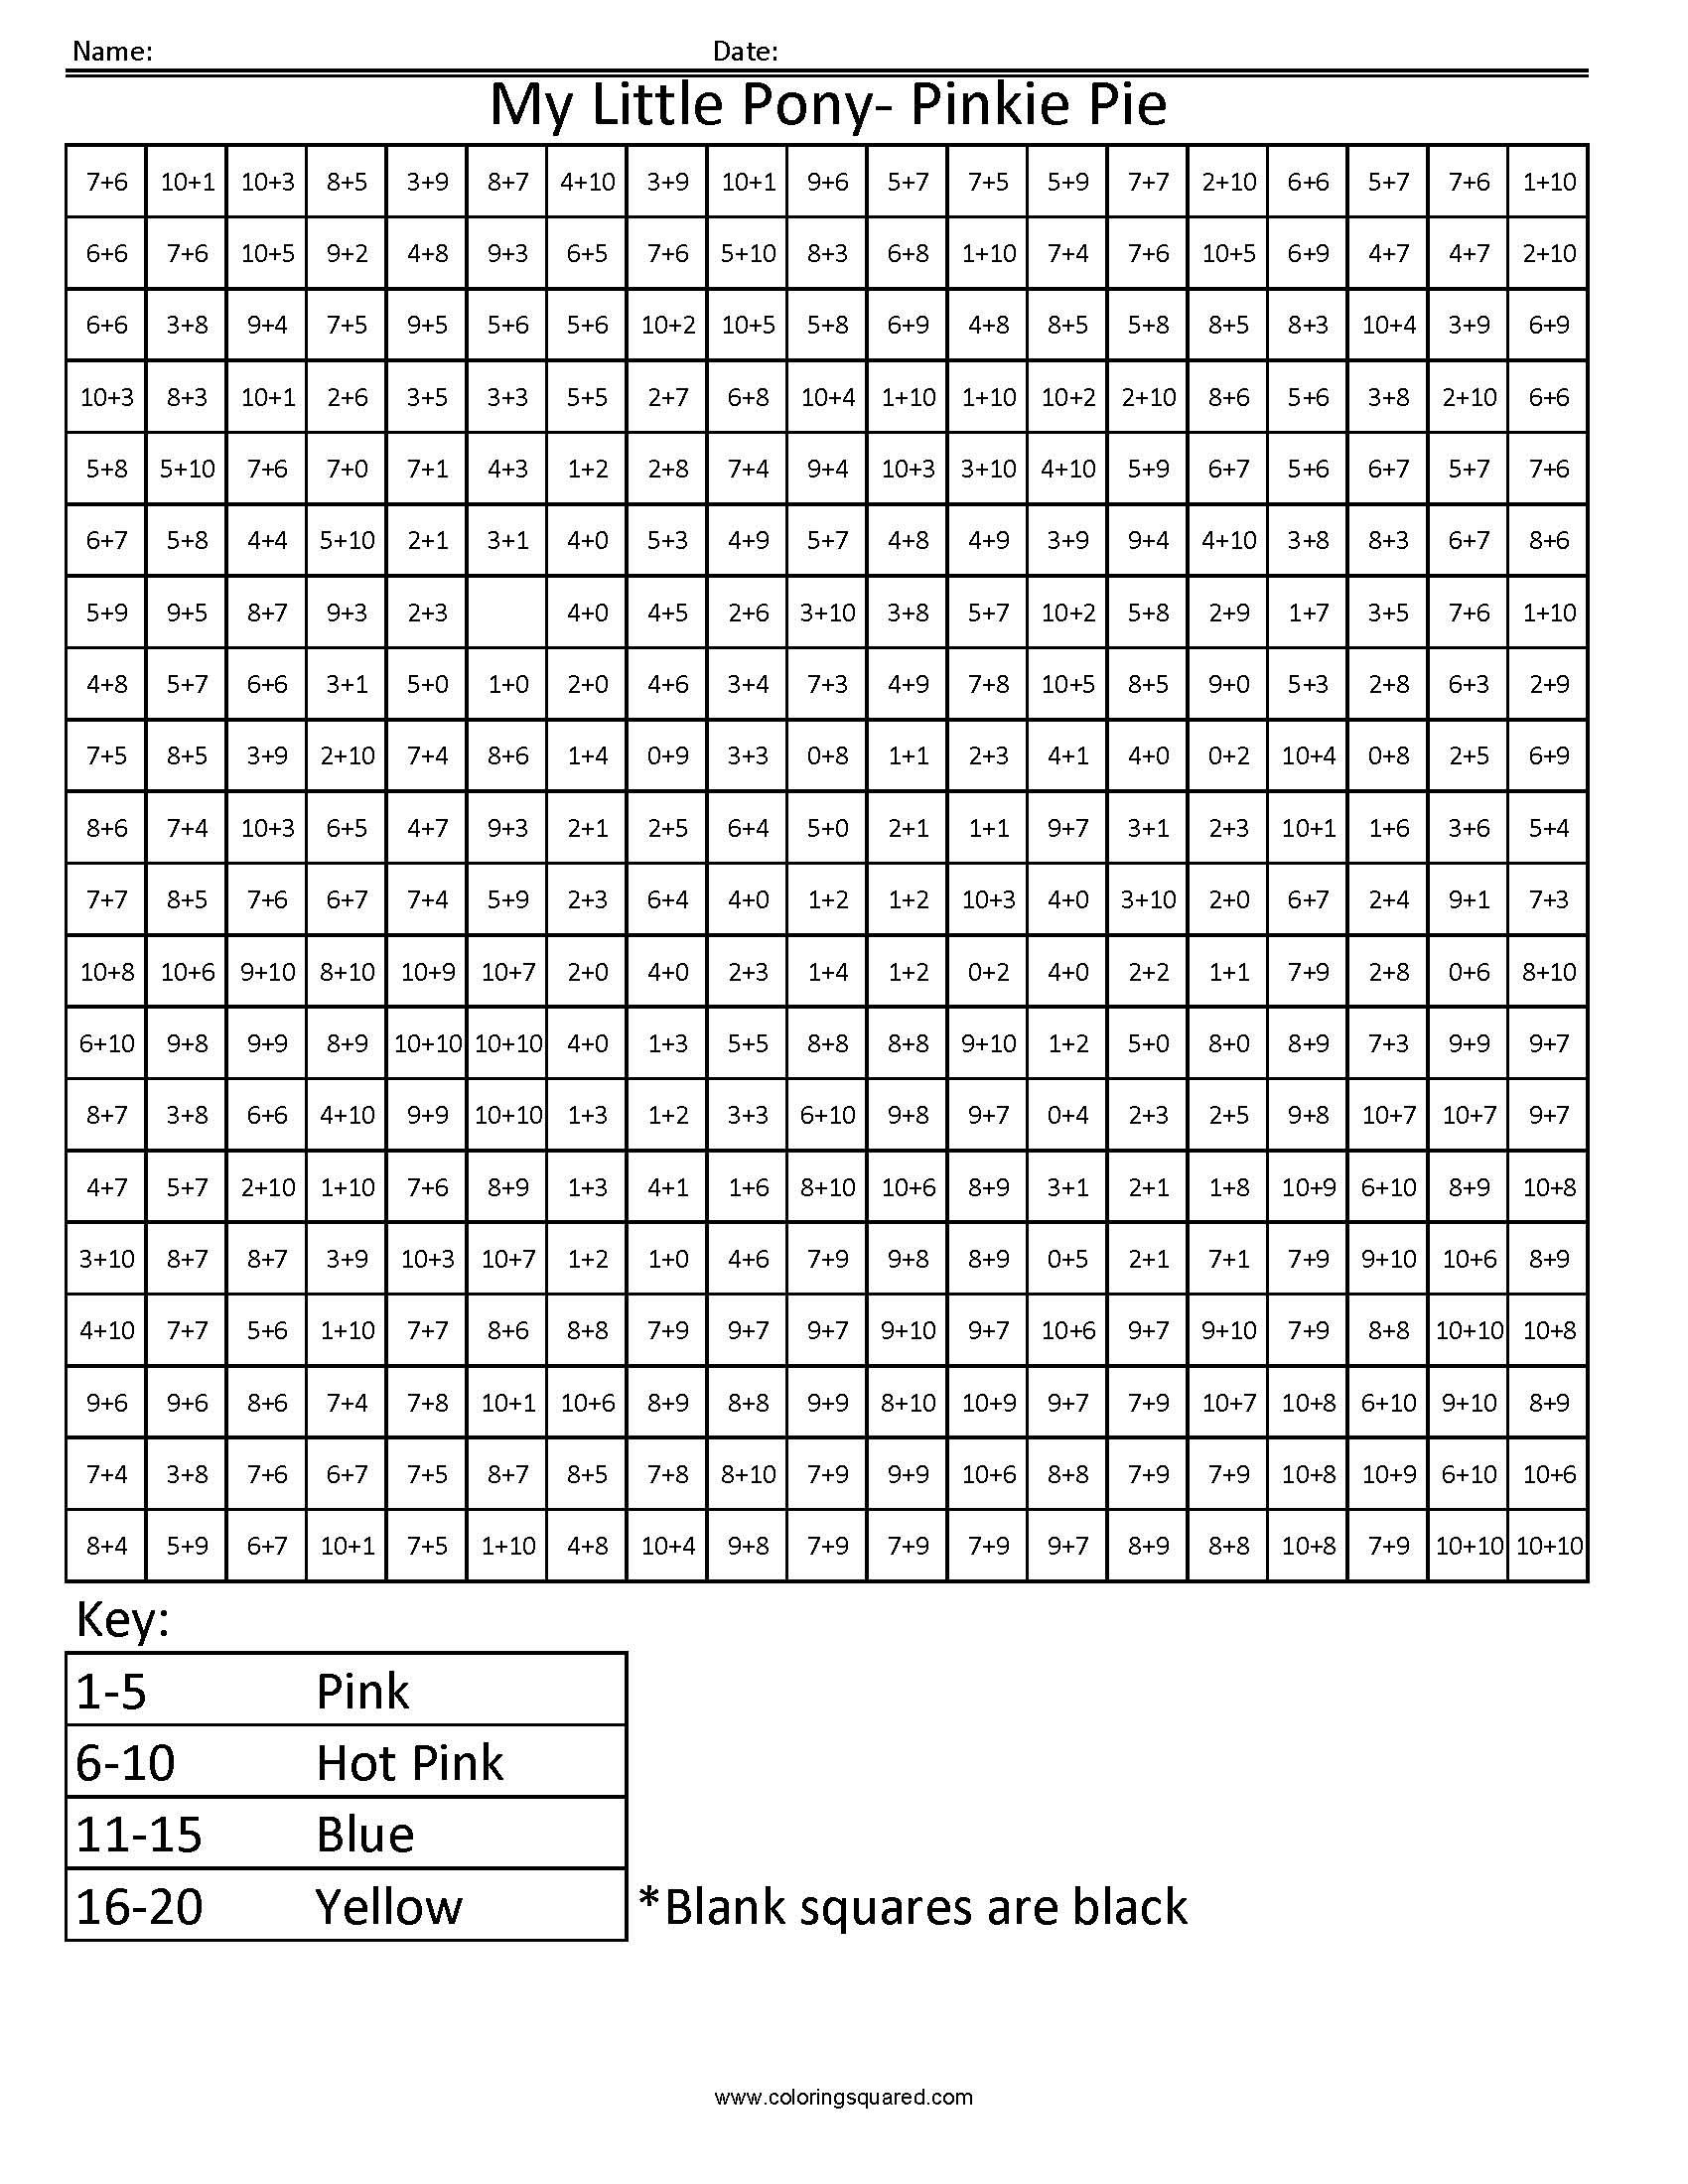 My Little Pony- Advanced Addition - Coloring Squared - Free Printable Math Mystery Picture Worksheets